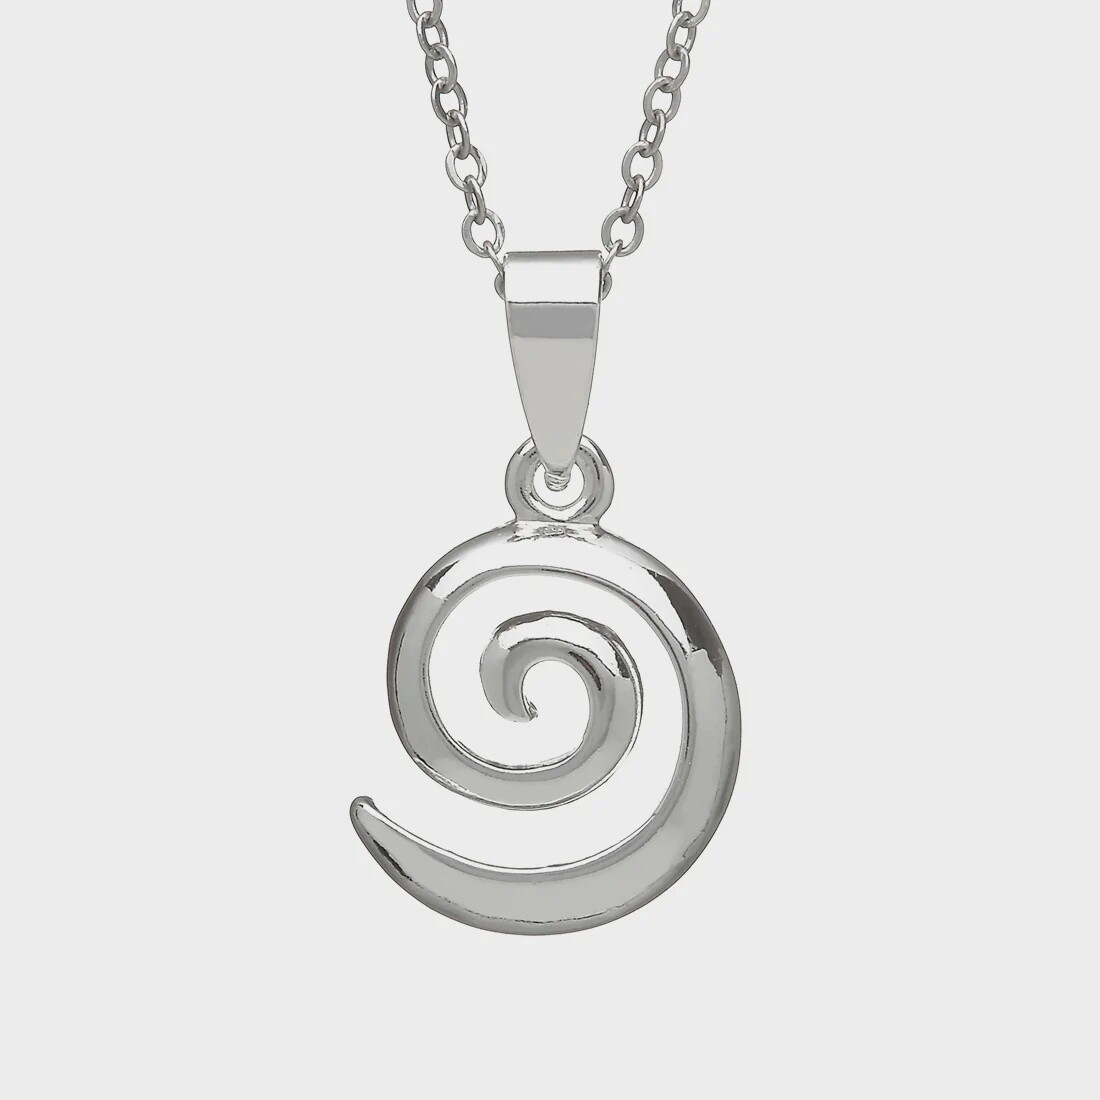 Silver Plated Spiral Necklace